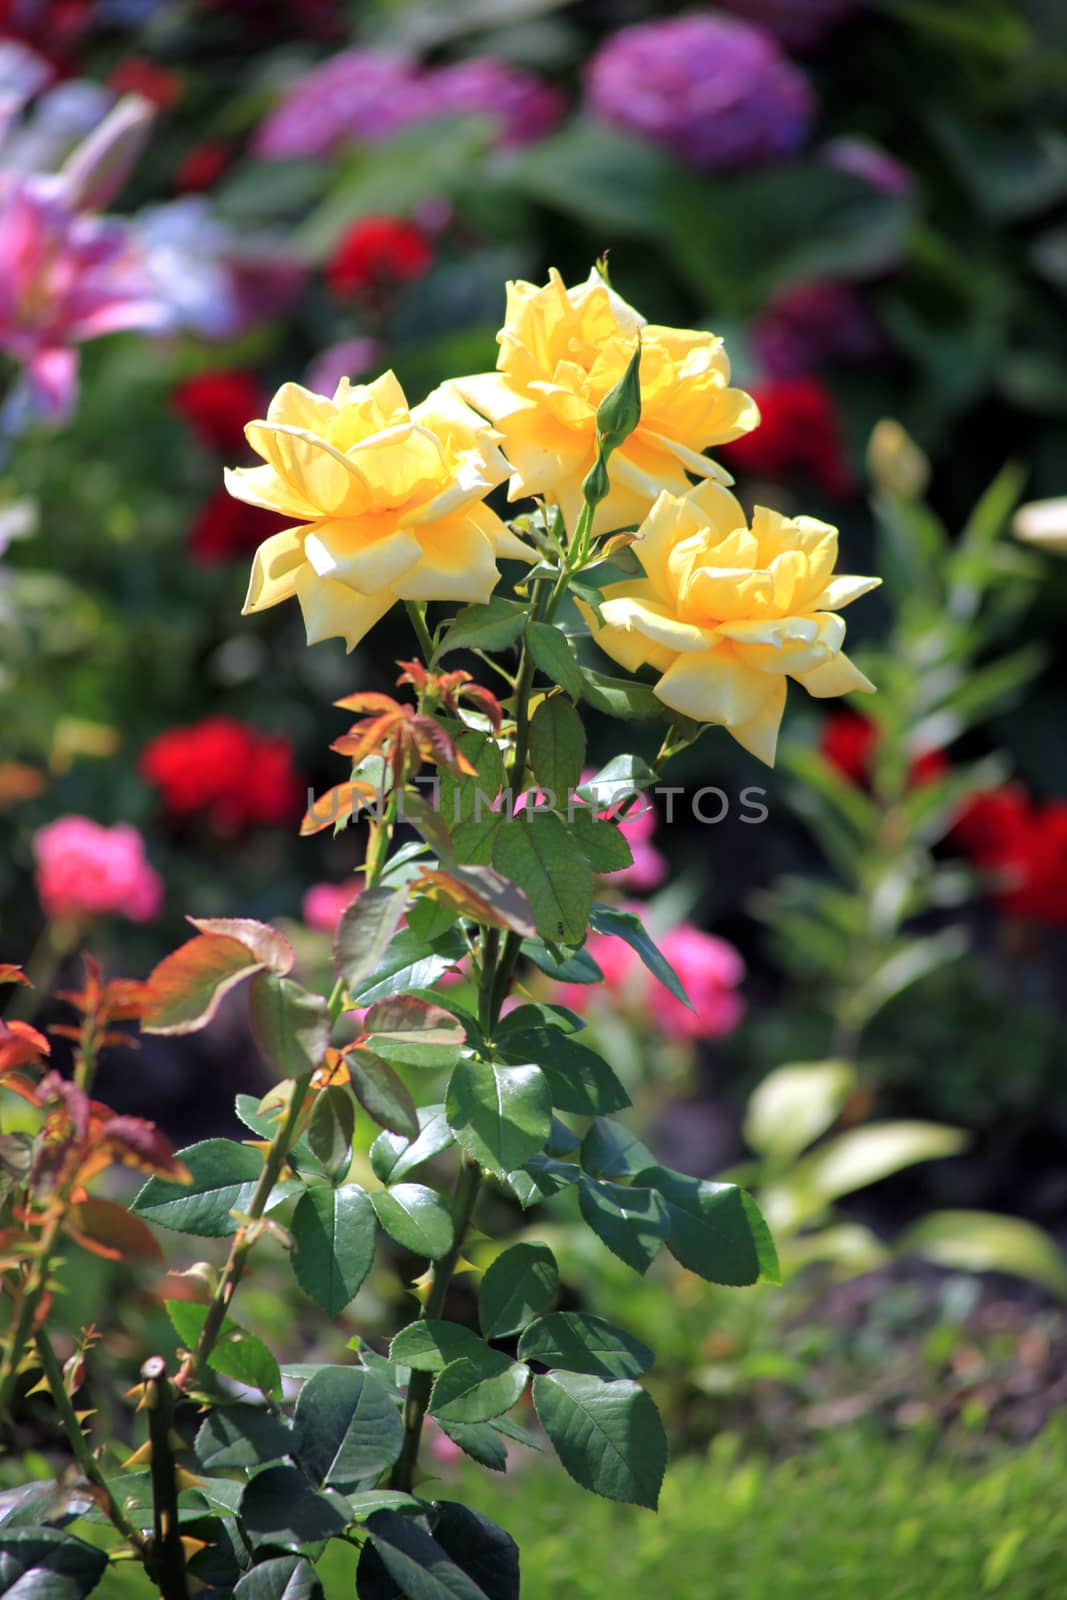 A bush with huge lush yellow roses on high green legs with prick by Adamchuk